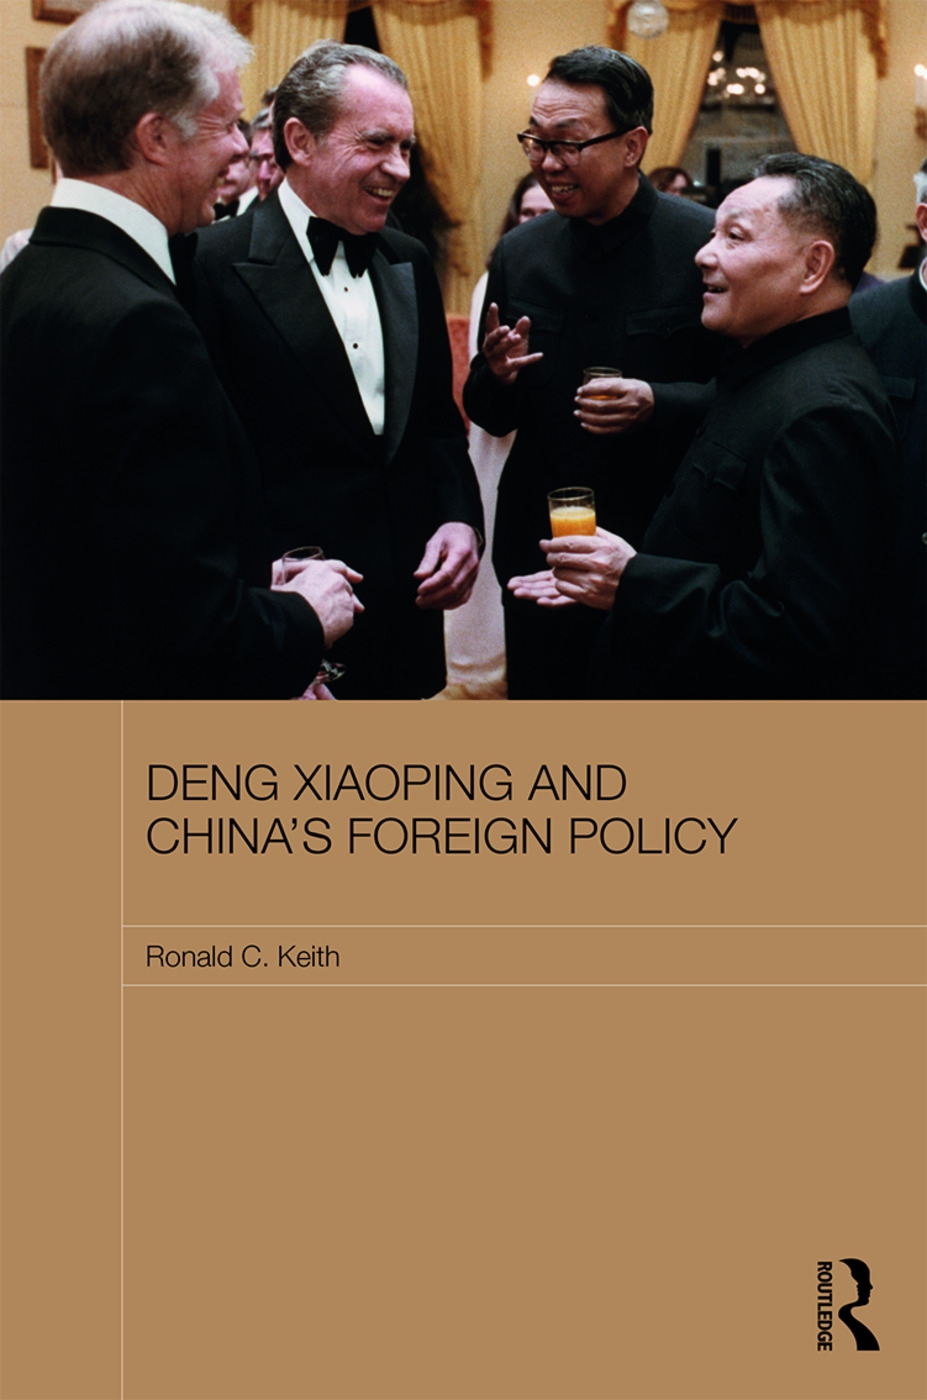 Deng Xiaoping and China’s Foreign Policy